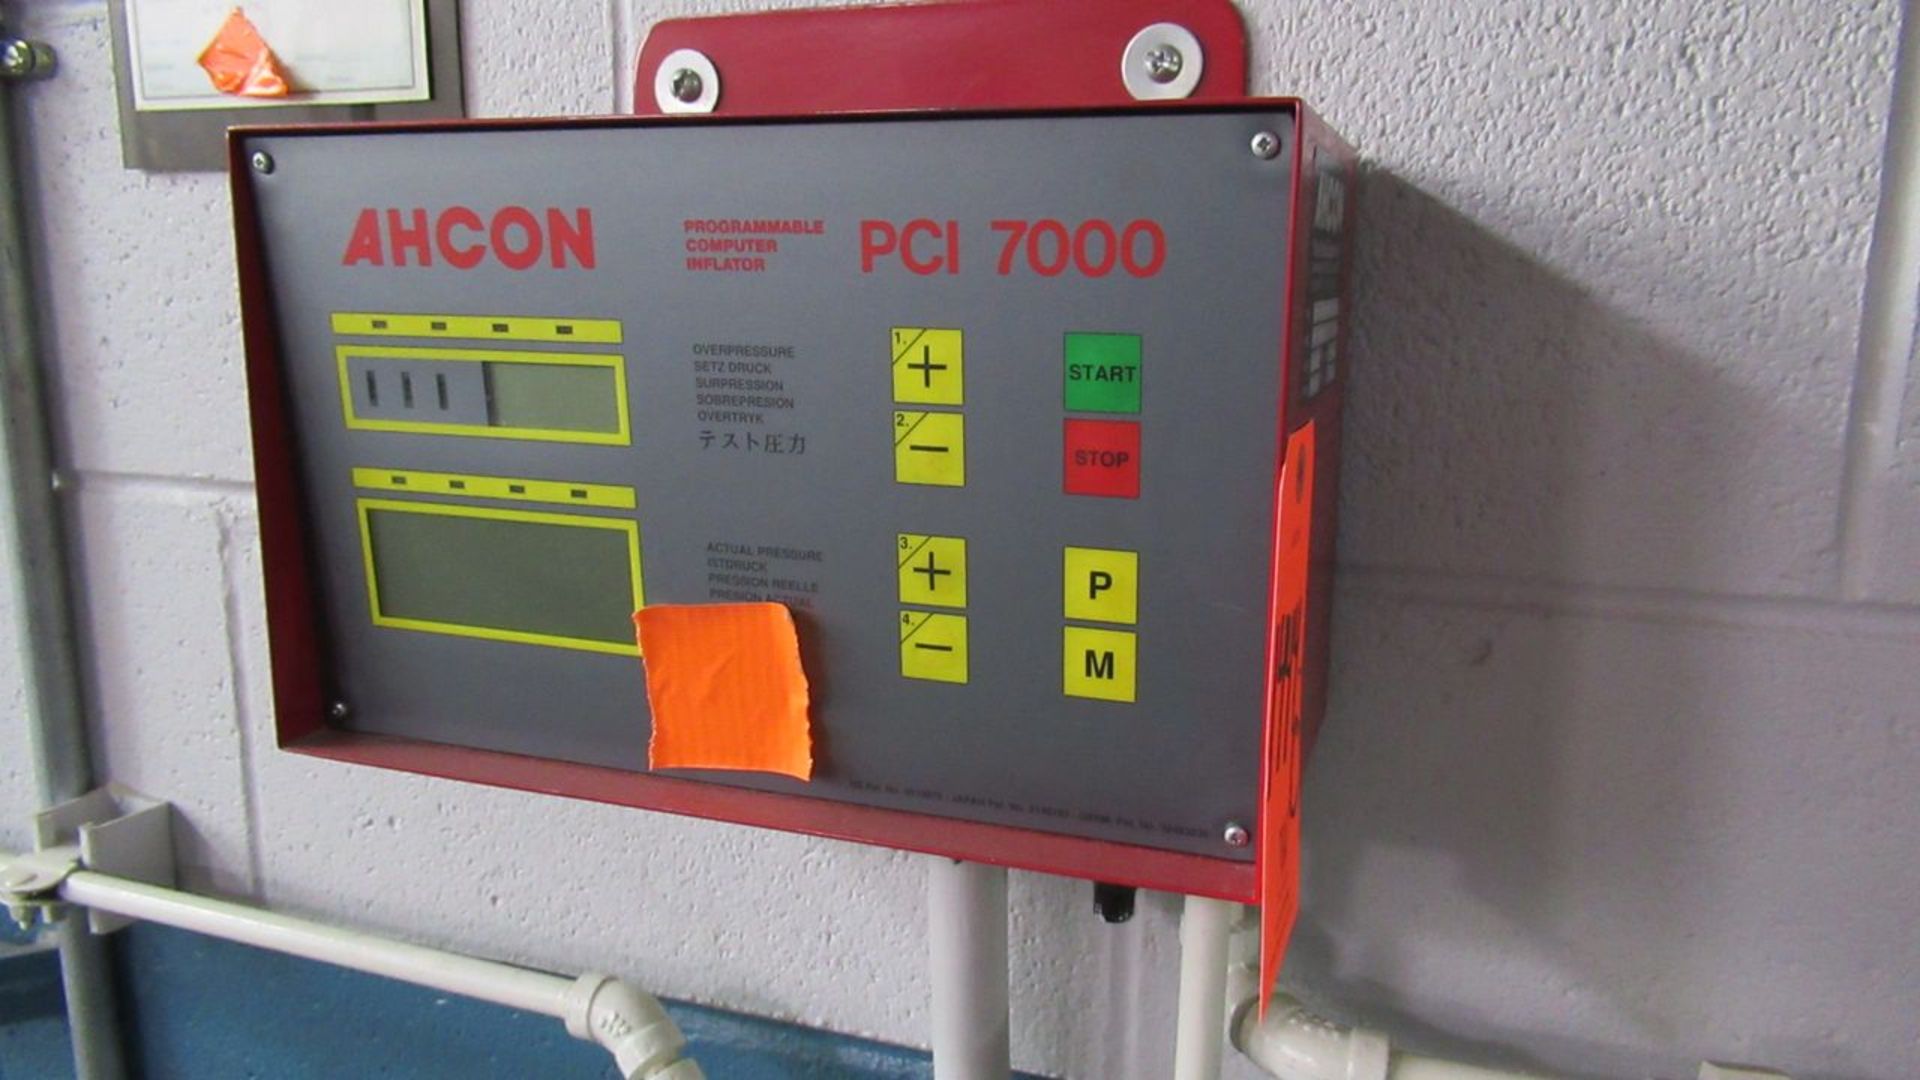 Ahcon PCI-7000 Programmable Computer Inflator, s/n 10.100.376, 145-200 Psi